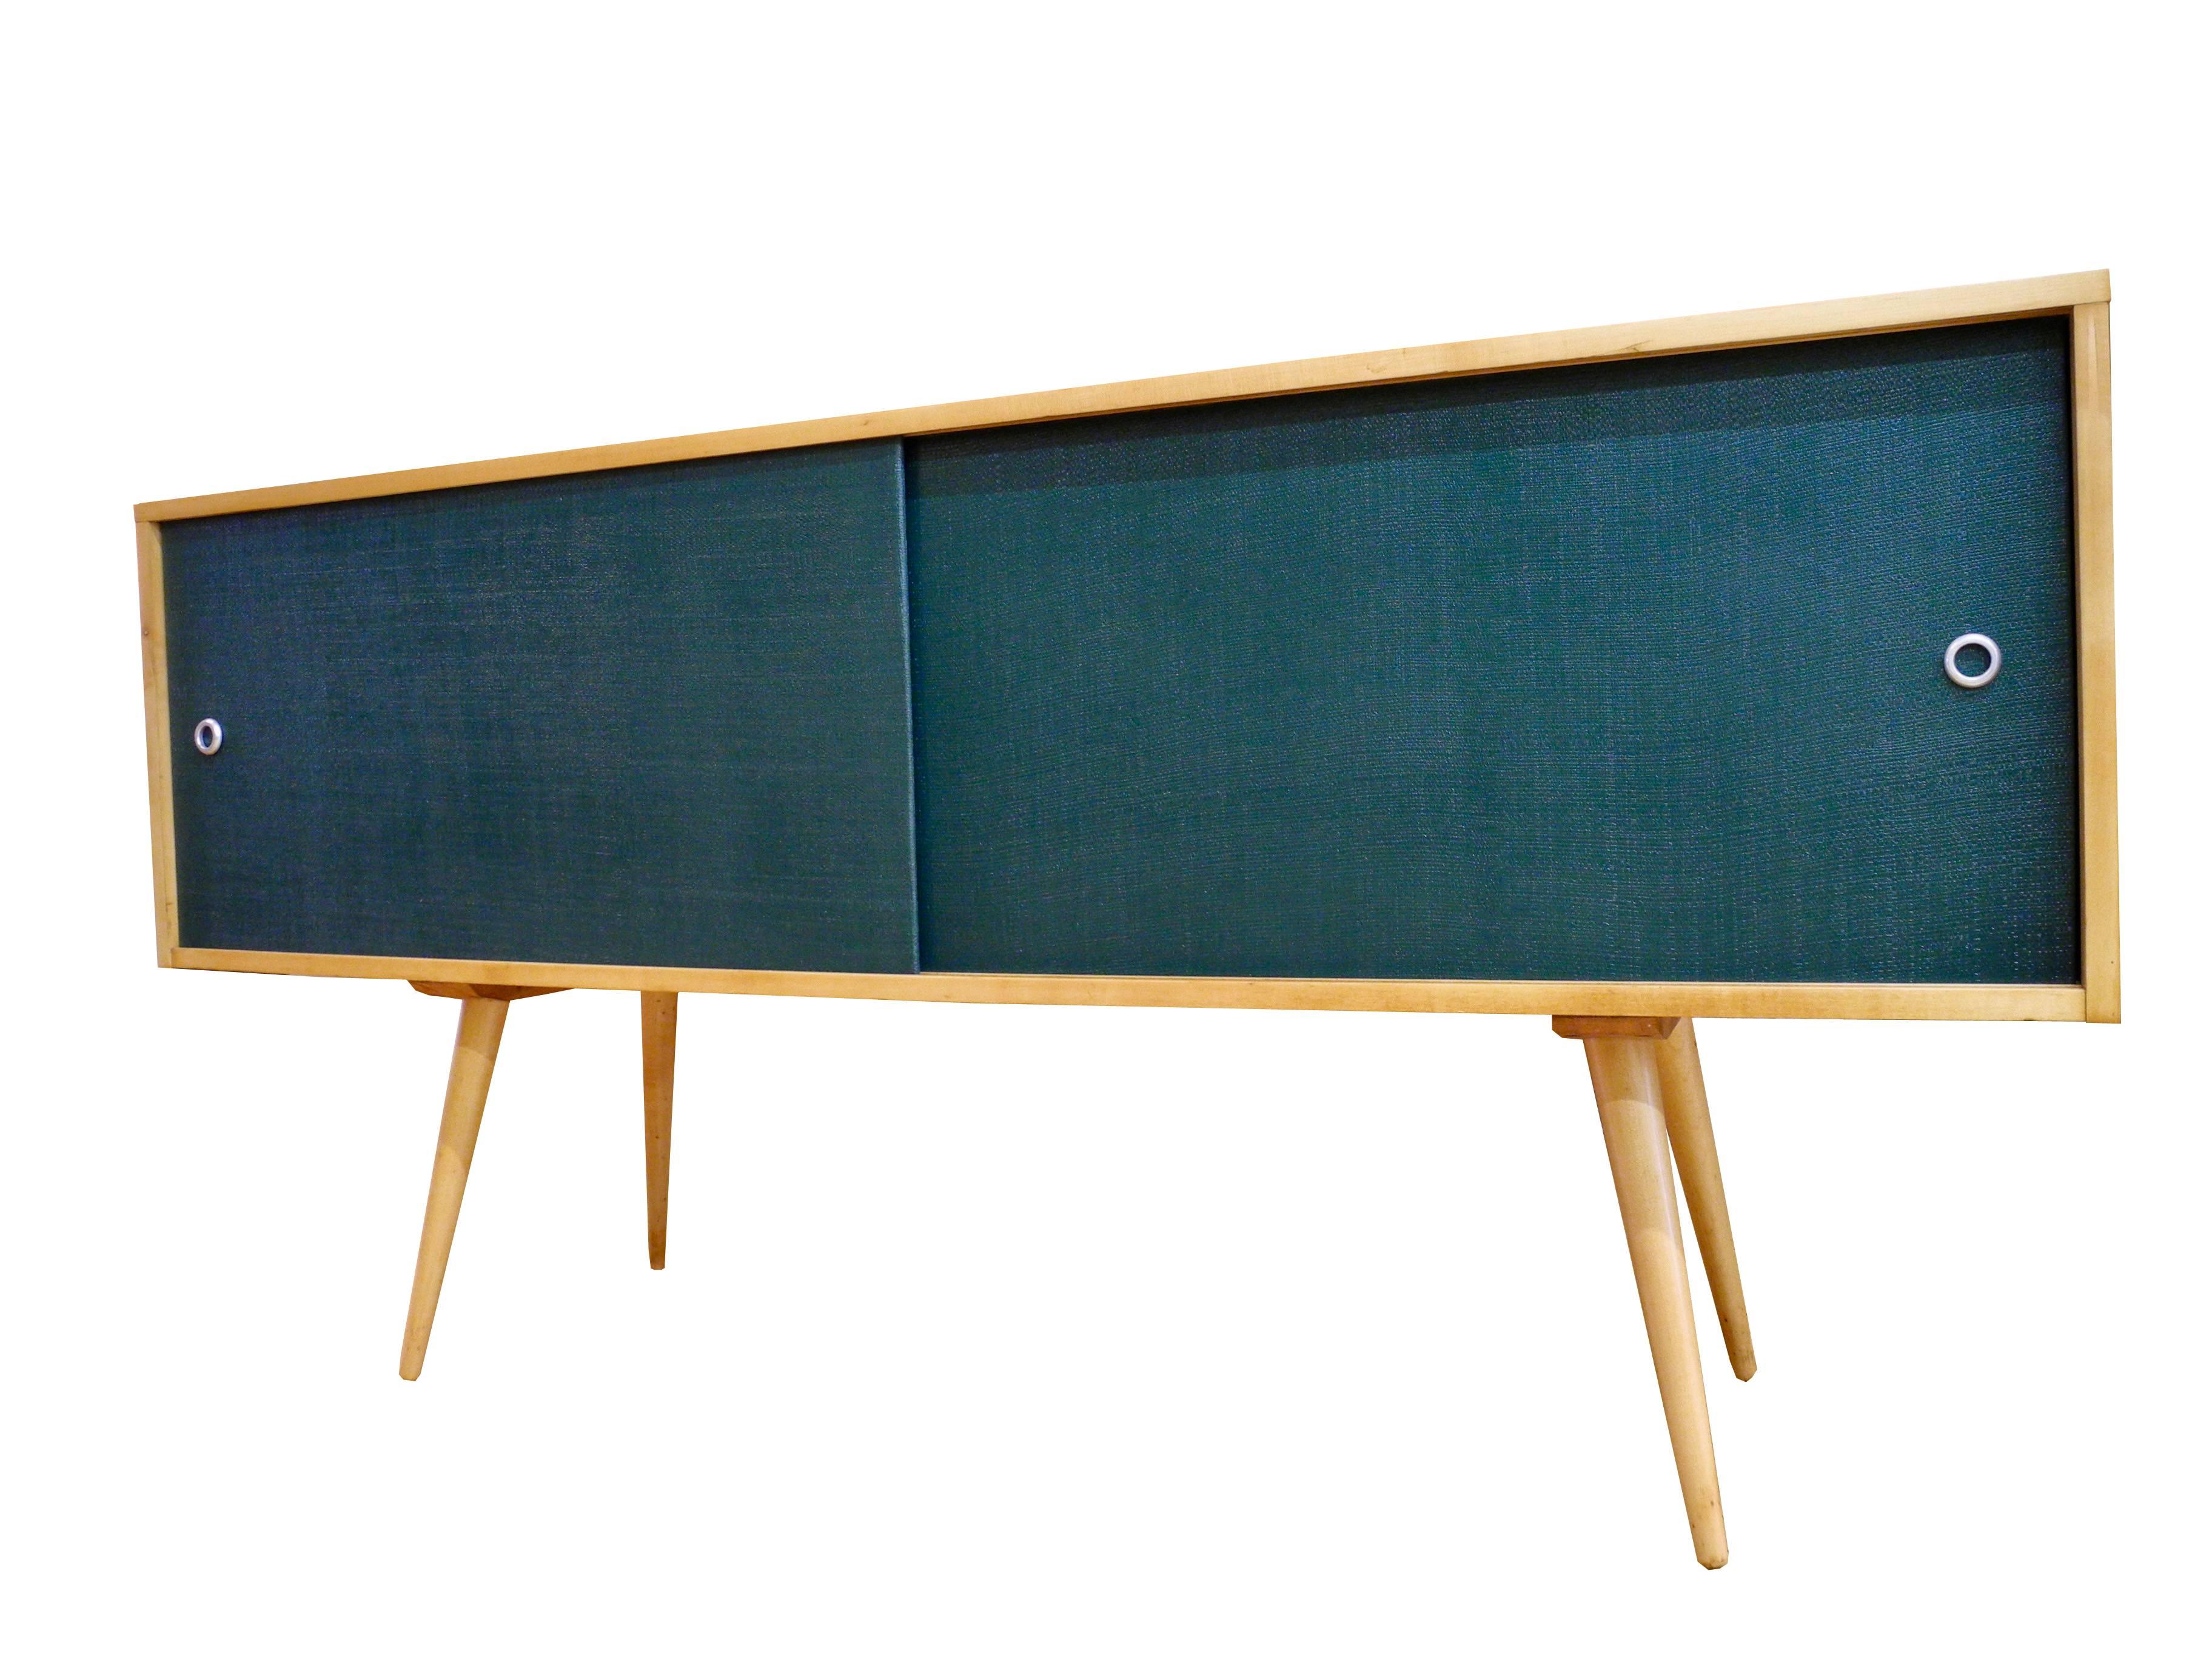 This modern sideboard designed by Paul McCobb has two sides both equipped with a shelf.
Made of a solid natural maple wood case with sliding doors painted forest green, it provides good storage. Restored and refinished.